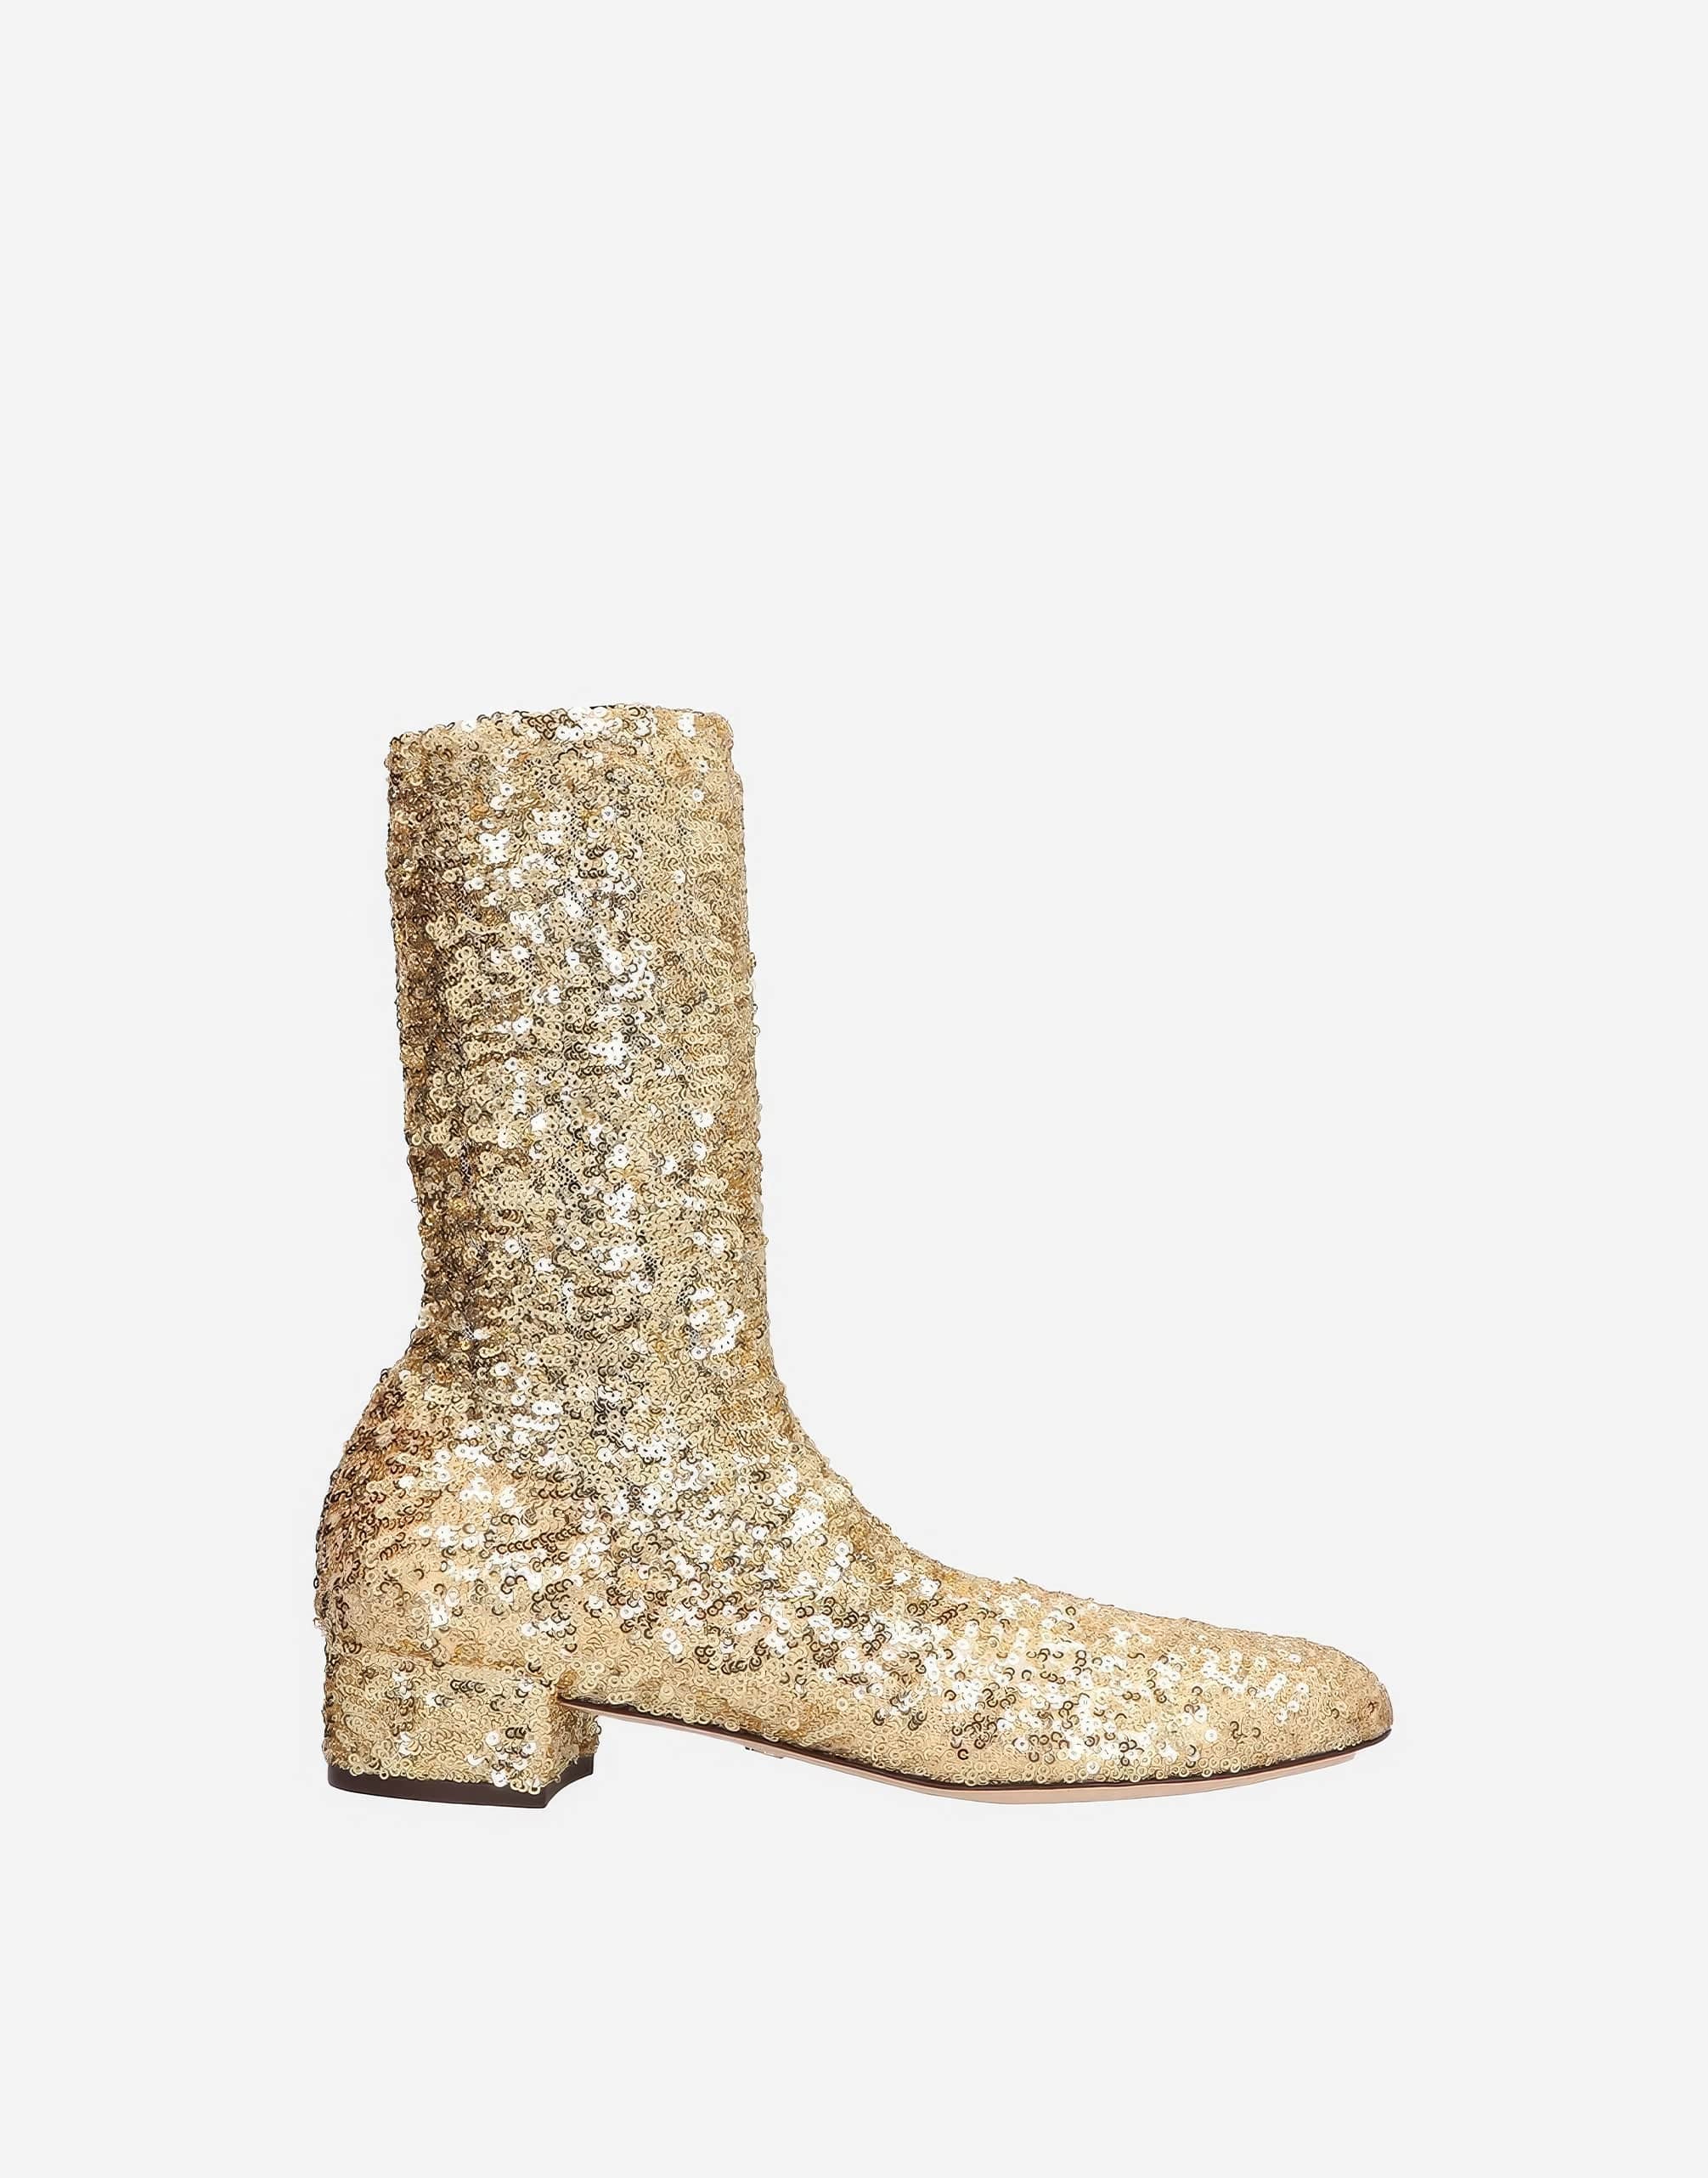 Dolce & Gabbana Gold Sequined Stretch Boots